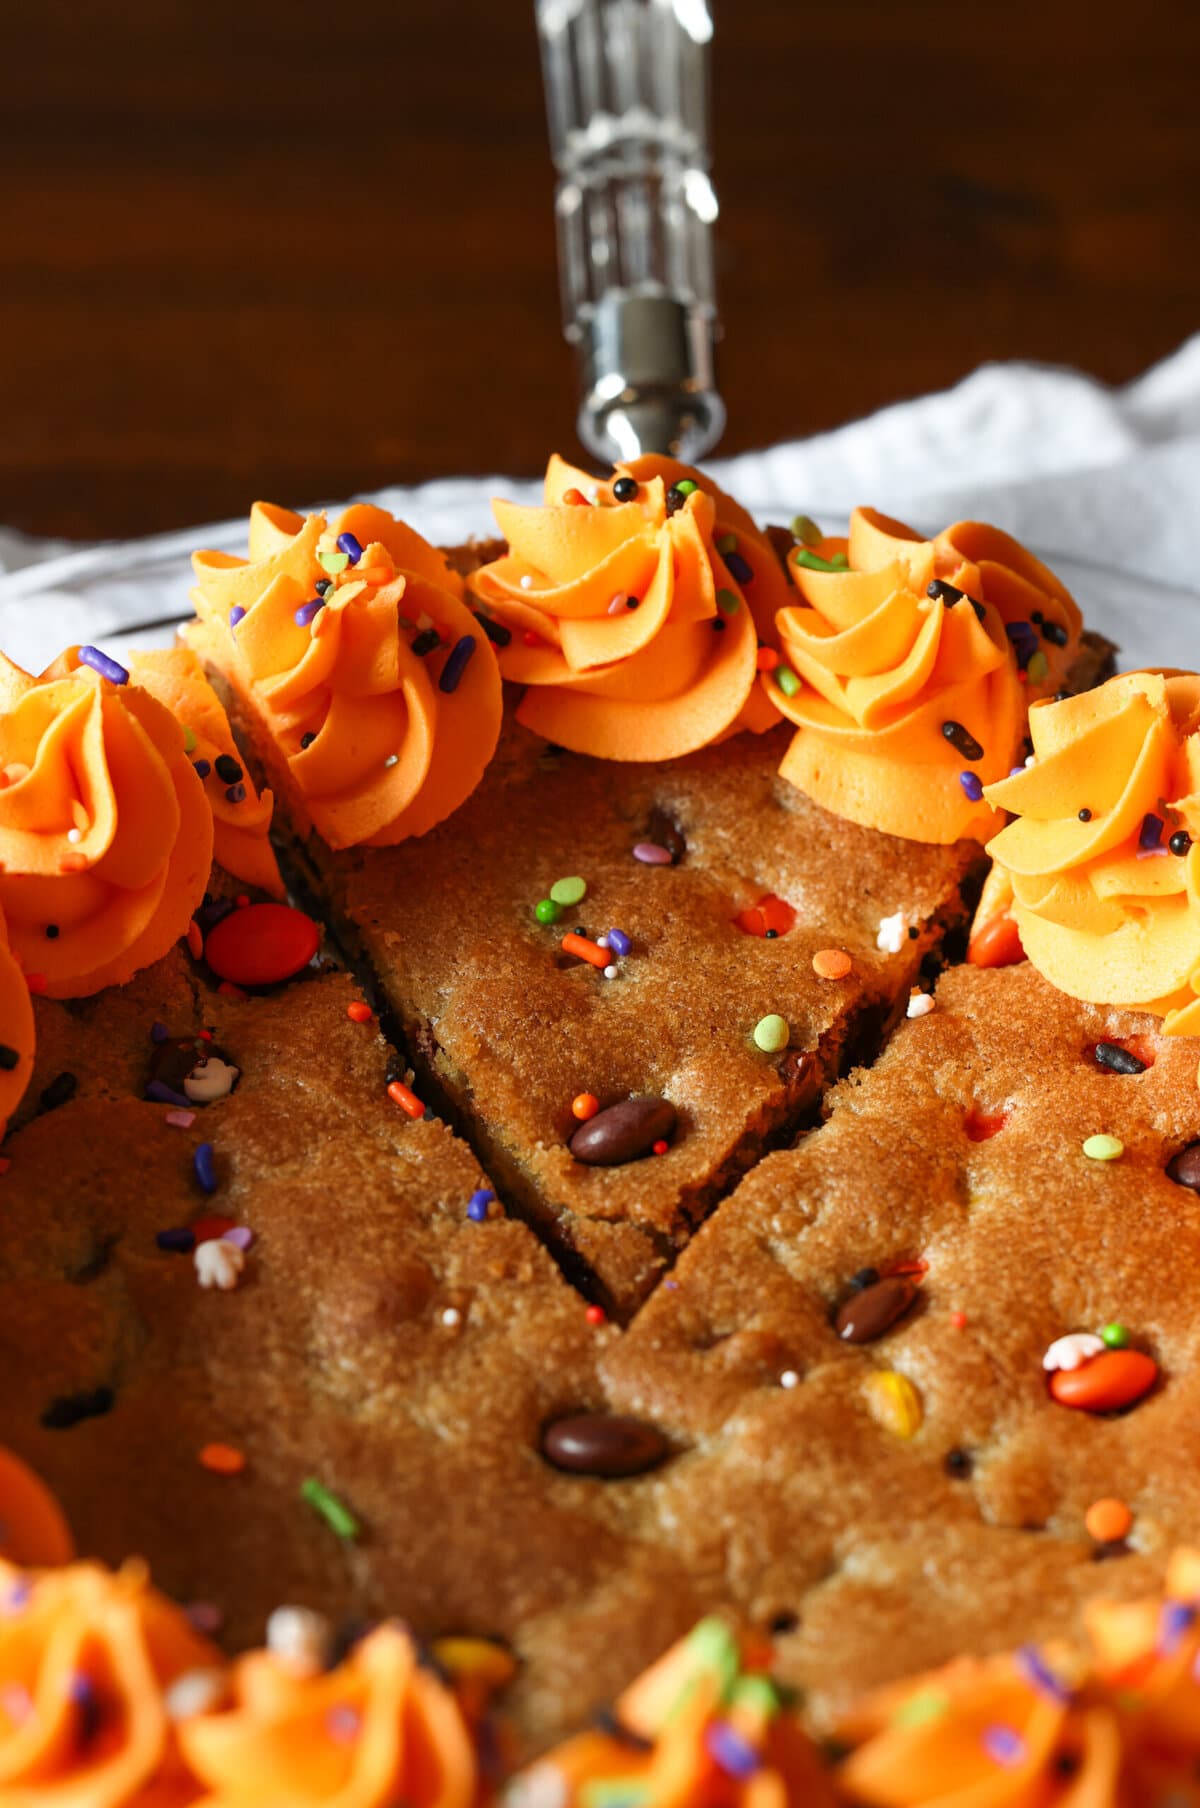 A slice of Halloween cookie cake with orange frosting being cut and served with a spatula.